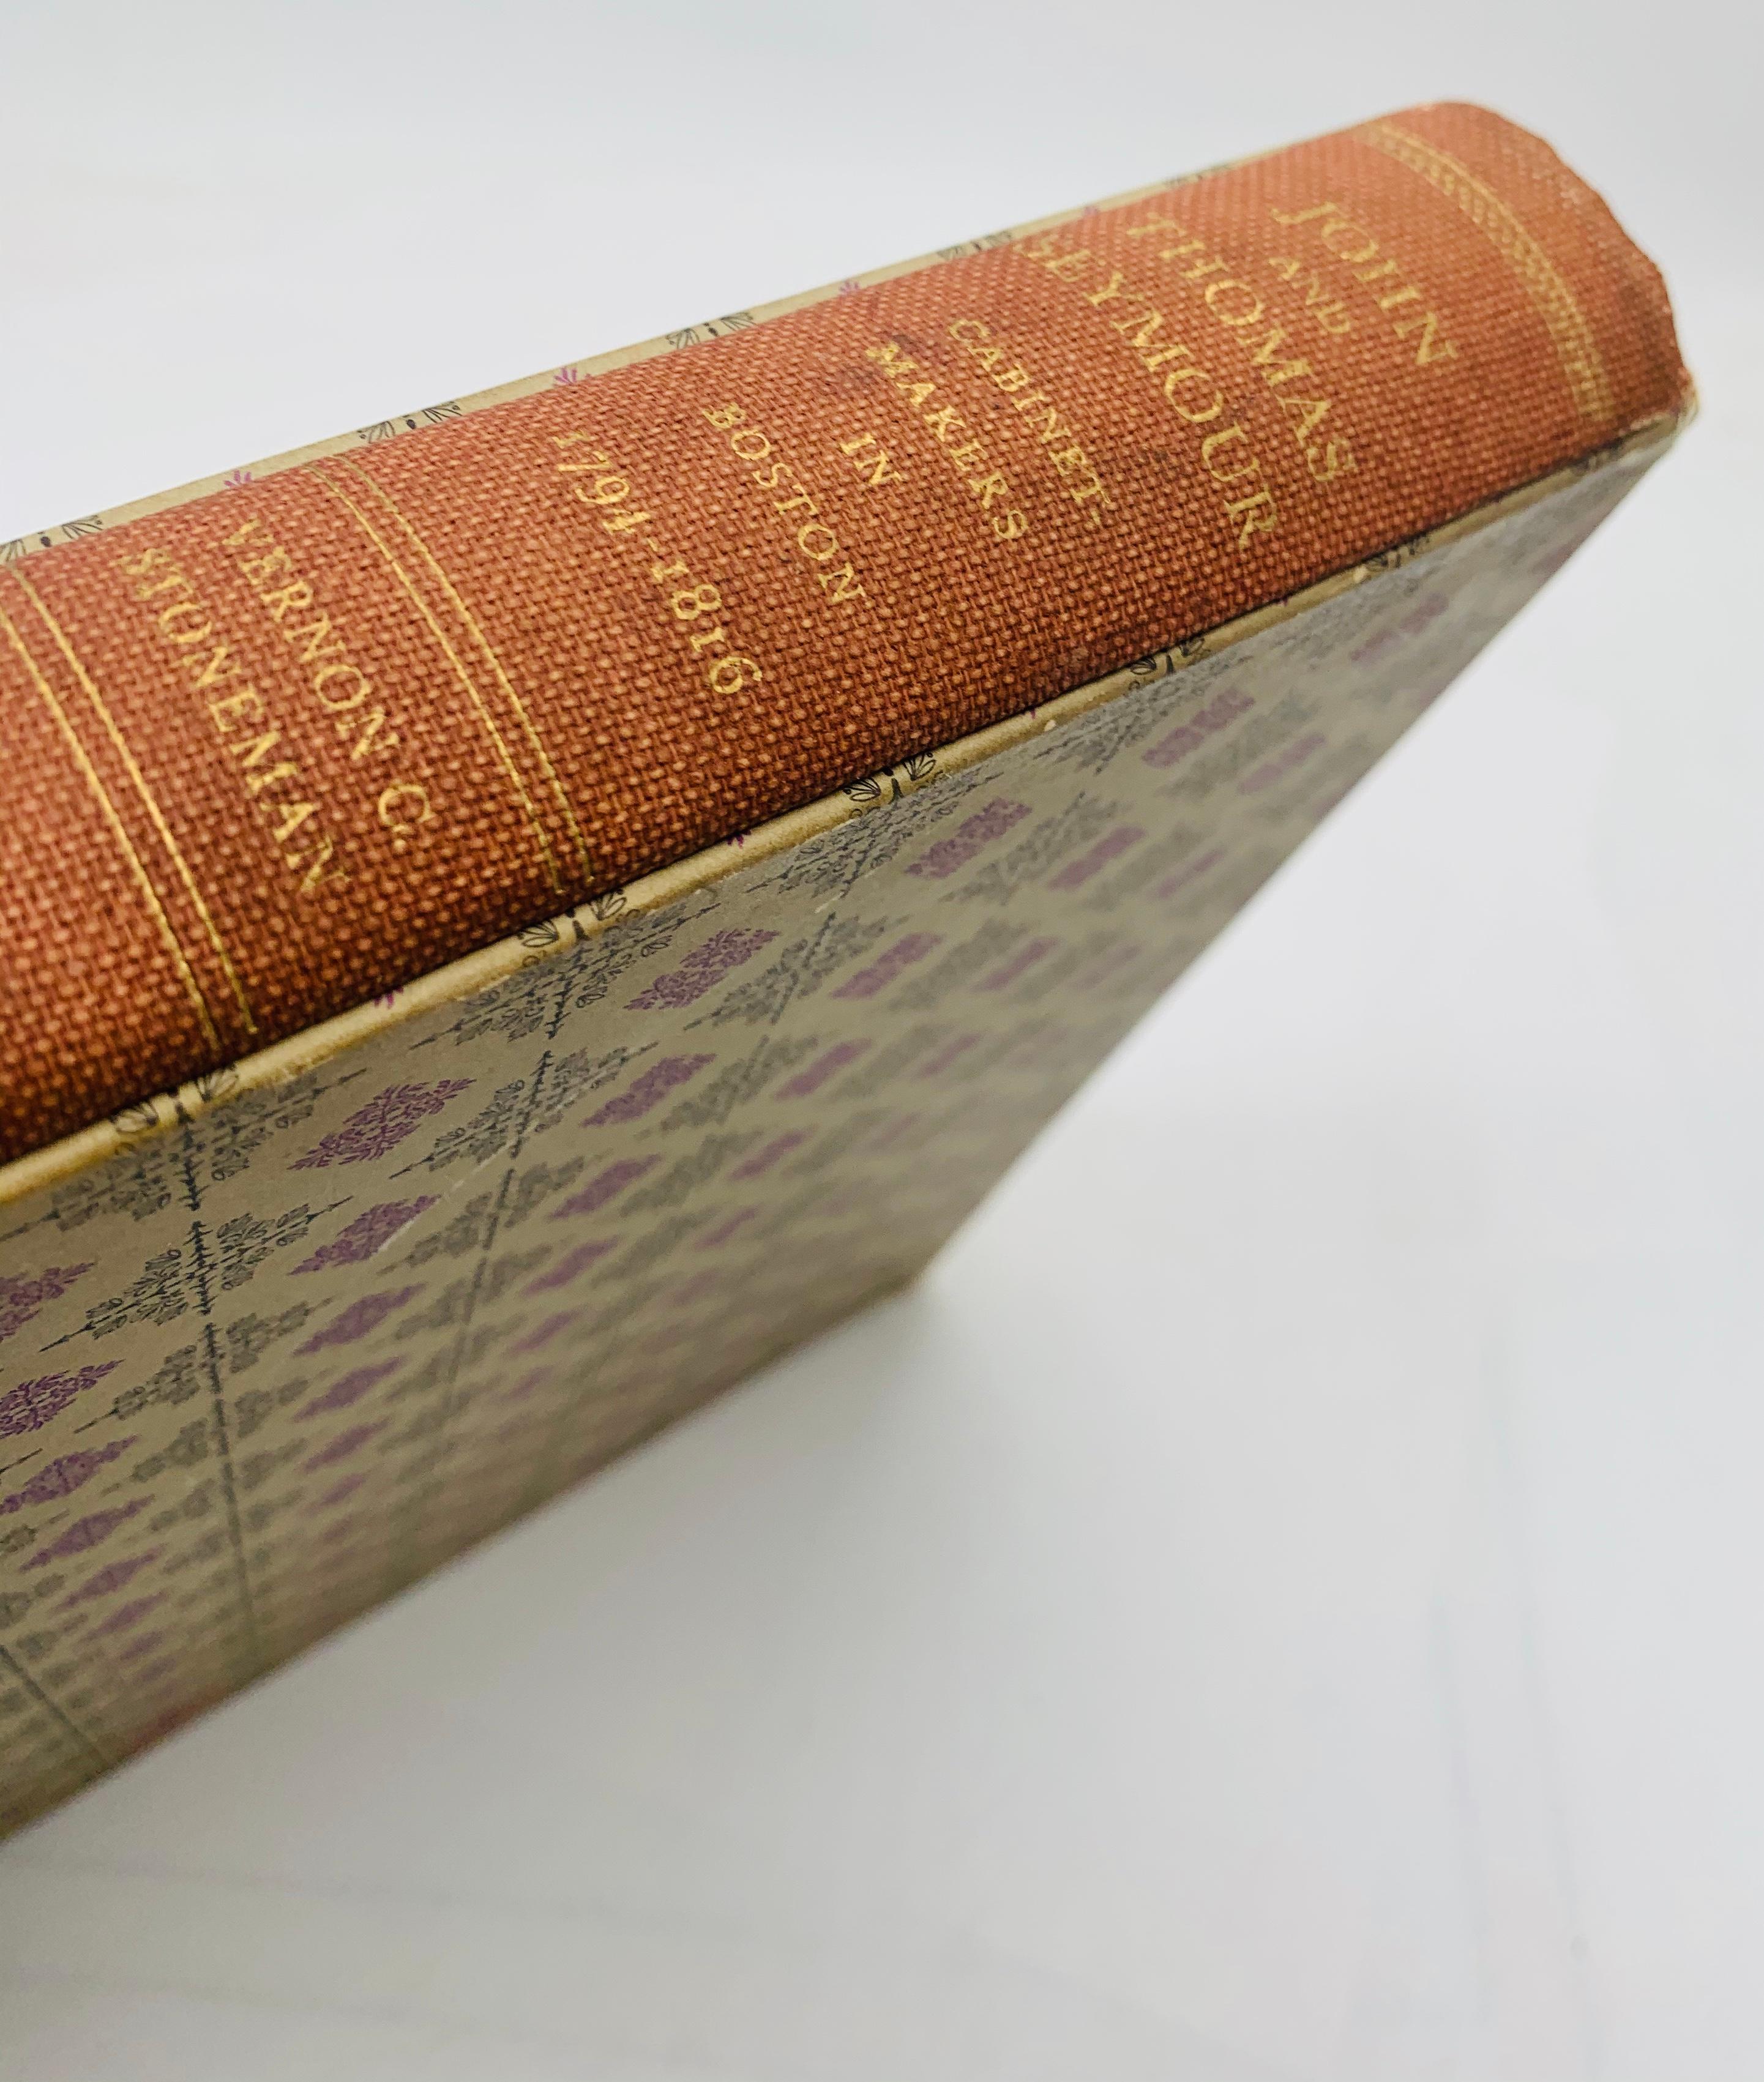 John and Thomas Seymour: Cabinetmakers in Boston 1794-1816 with Slipcase